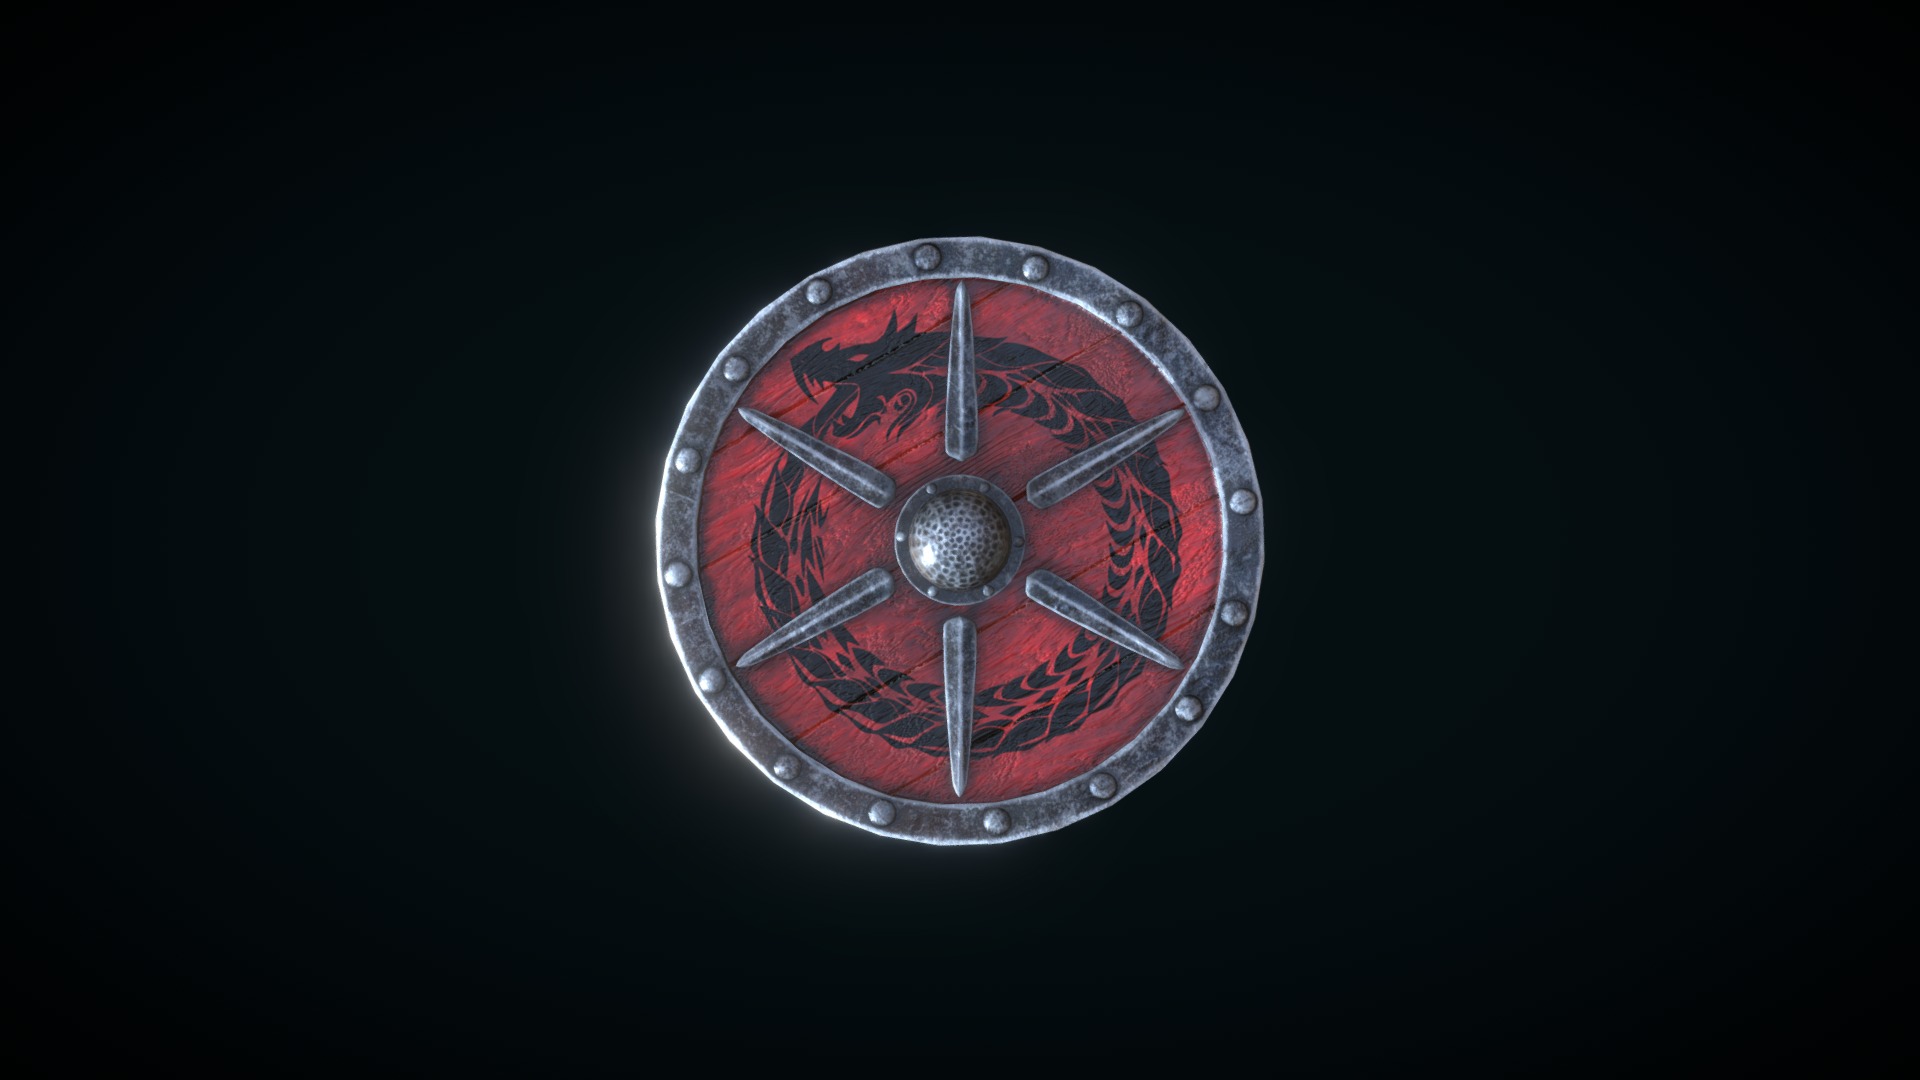 3D model Viking_Shield - This is a 3D model of the Viking_Shield. The 3D model is about a circular object with a red circle and a black background.